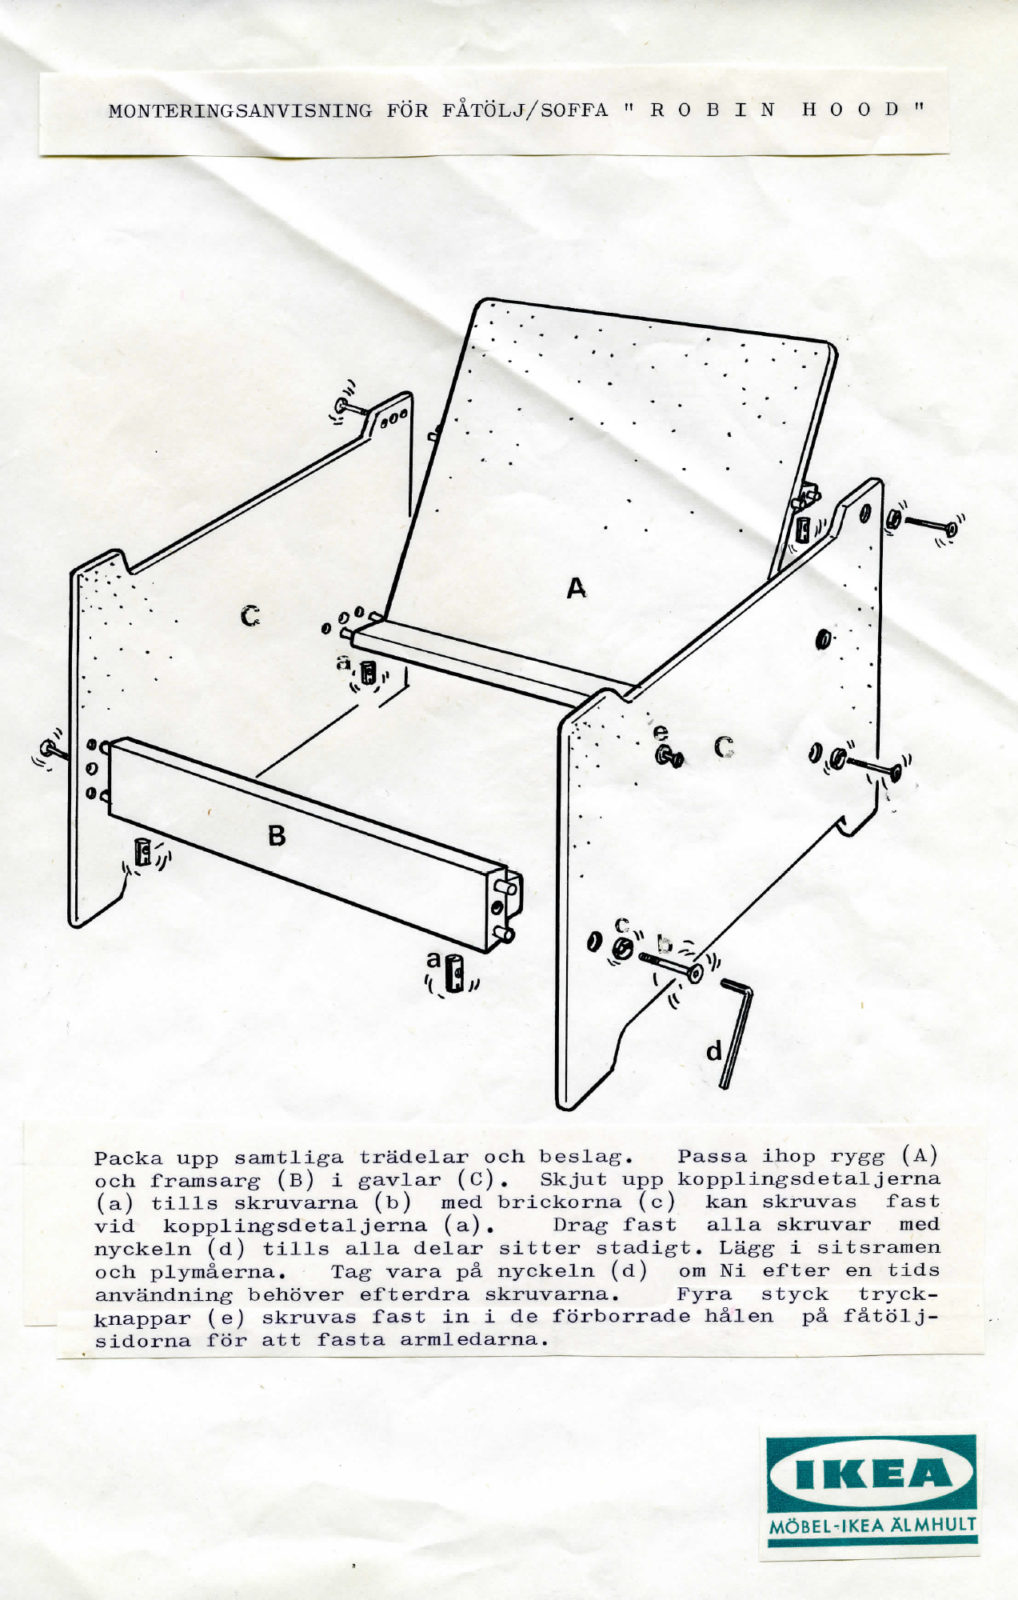 Facsimile of IKEA assembly instructions in Swedish for armchair, explaining how to use the Allen key.